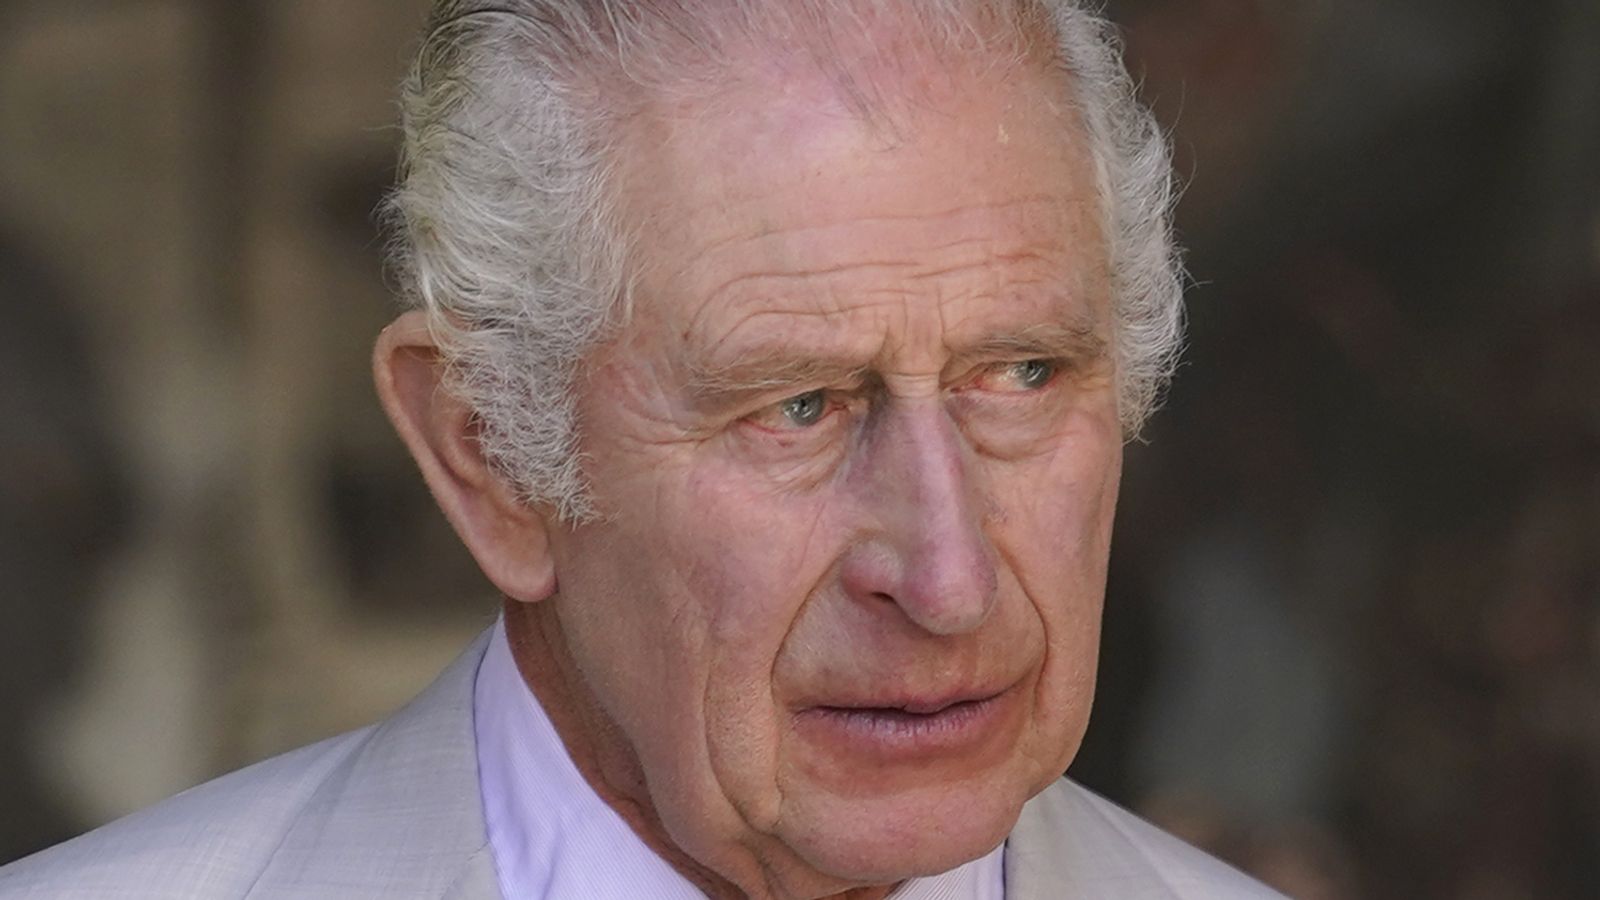 King Charles to attend hospital for prostate treatment